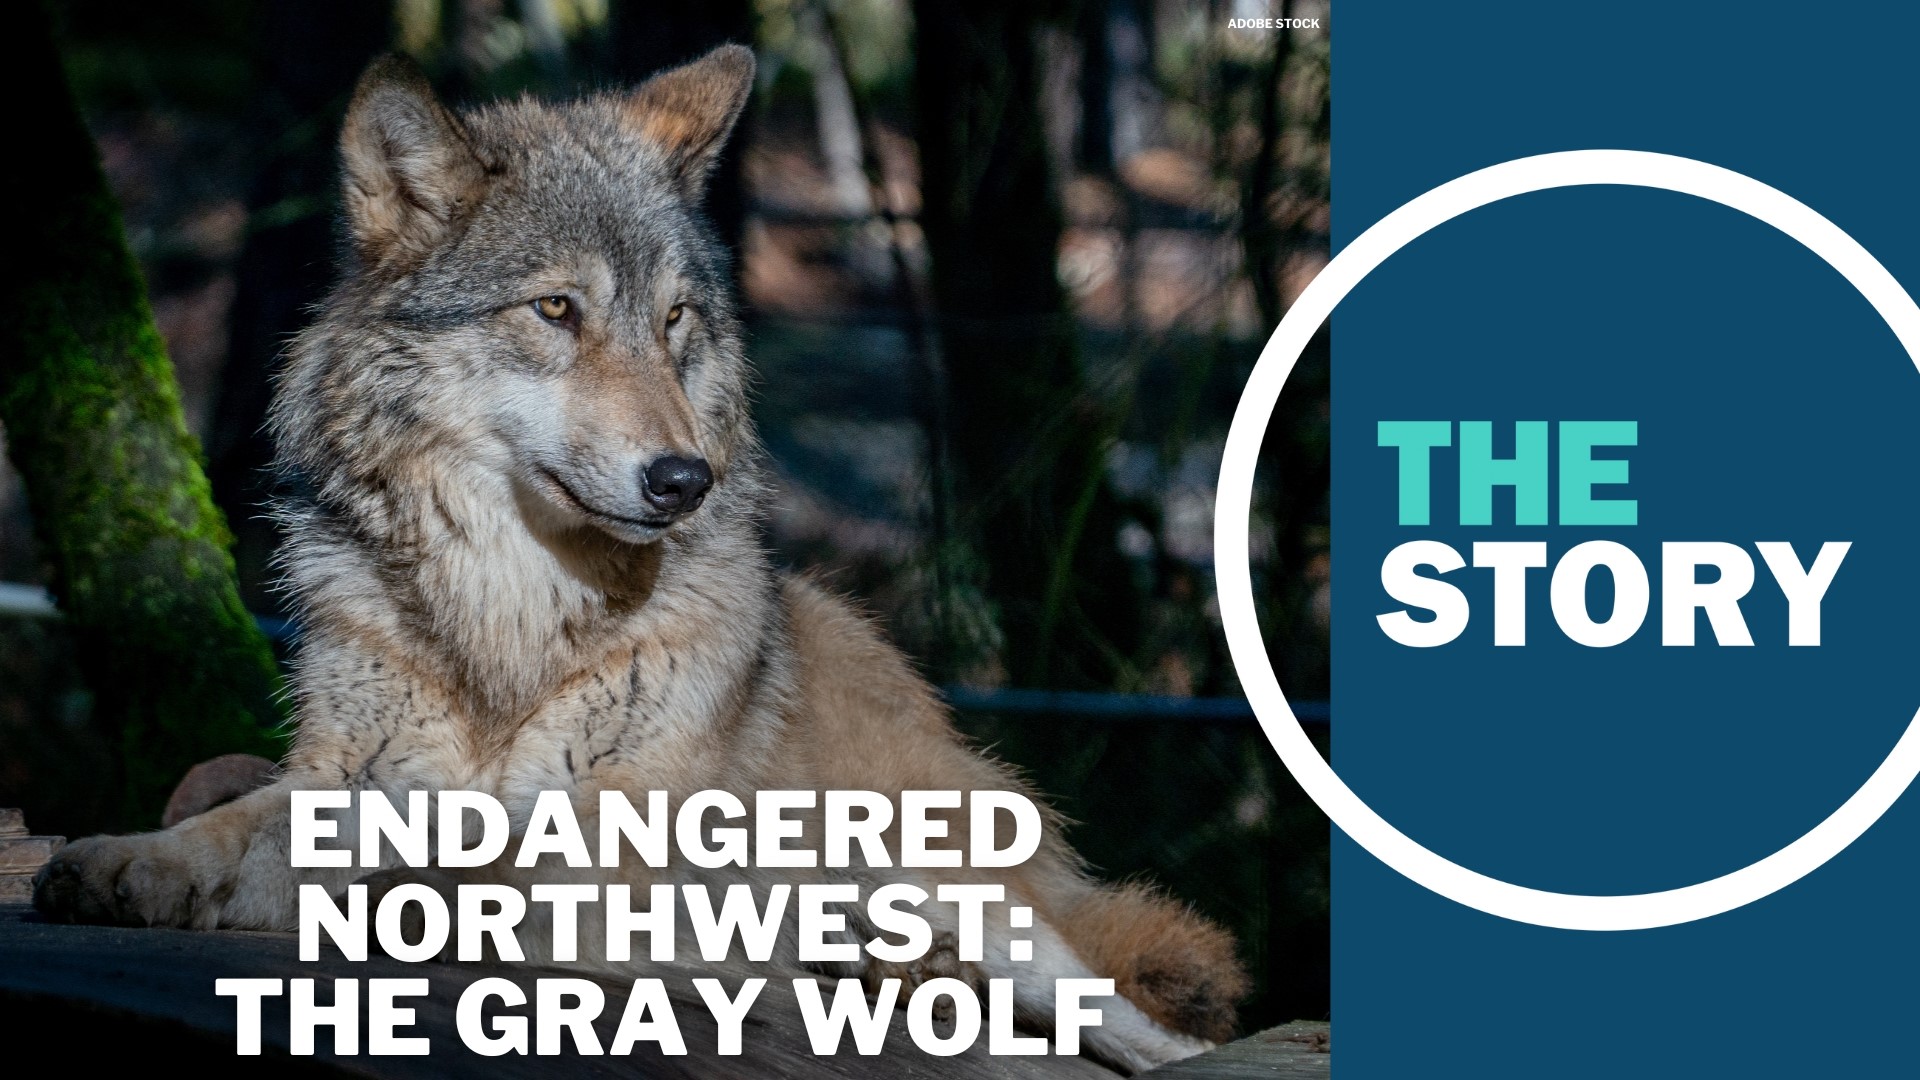 Wolves used to roam all over the West, but after a century of bounty programs, the predators were extirpated from much of their native range in the mid 1900s.